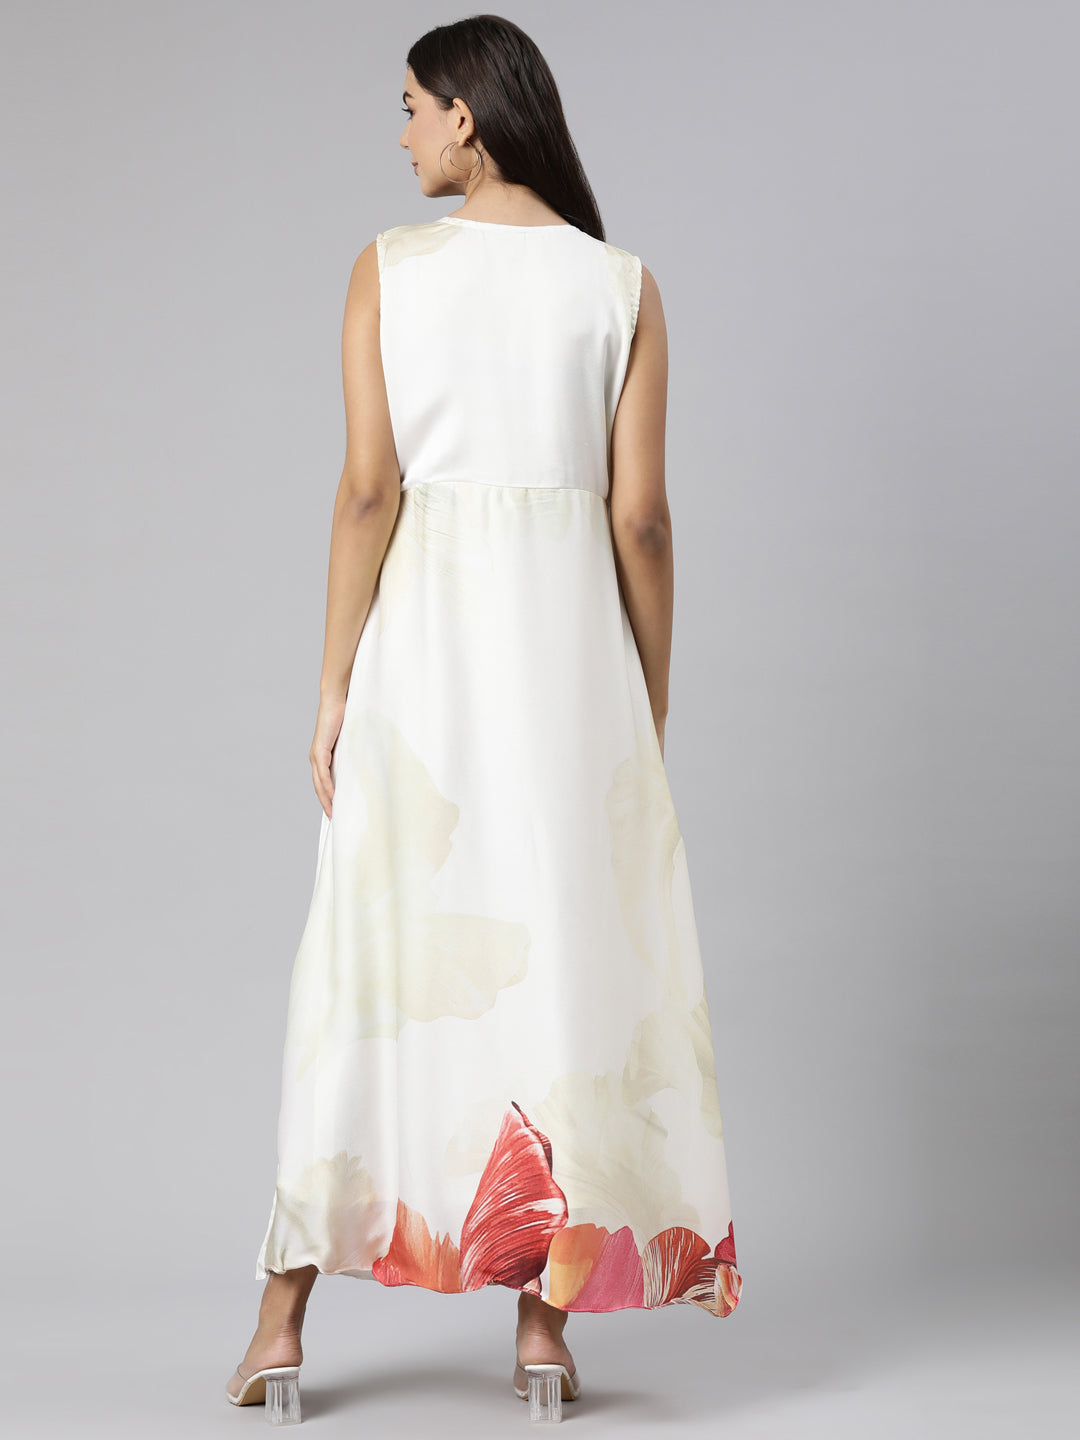 Neeru's Off White Straight Casual Floral Dresses